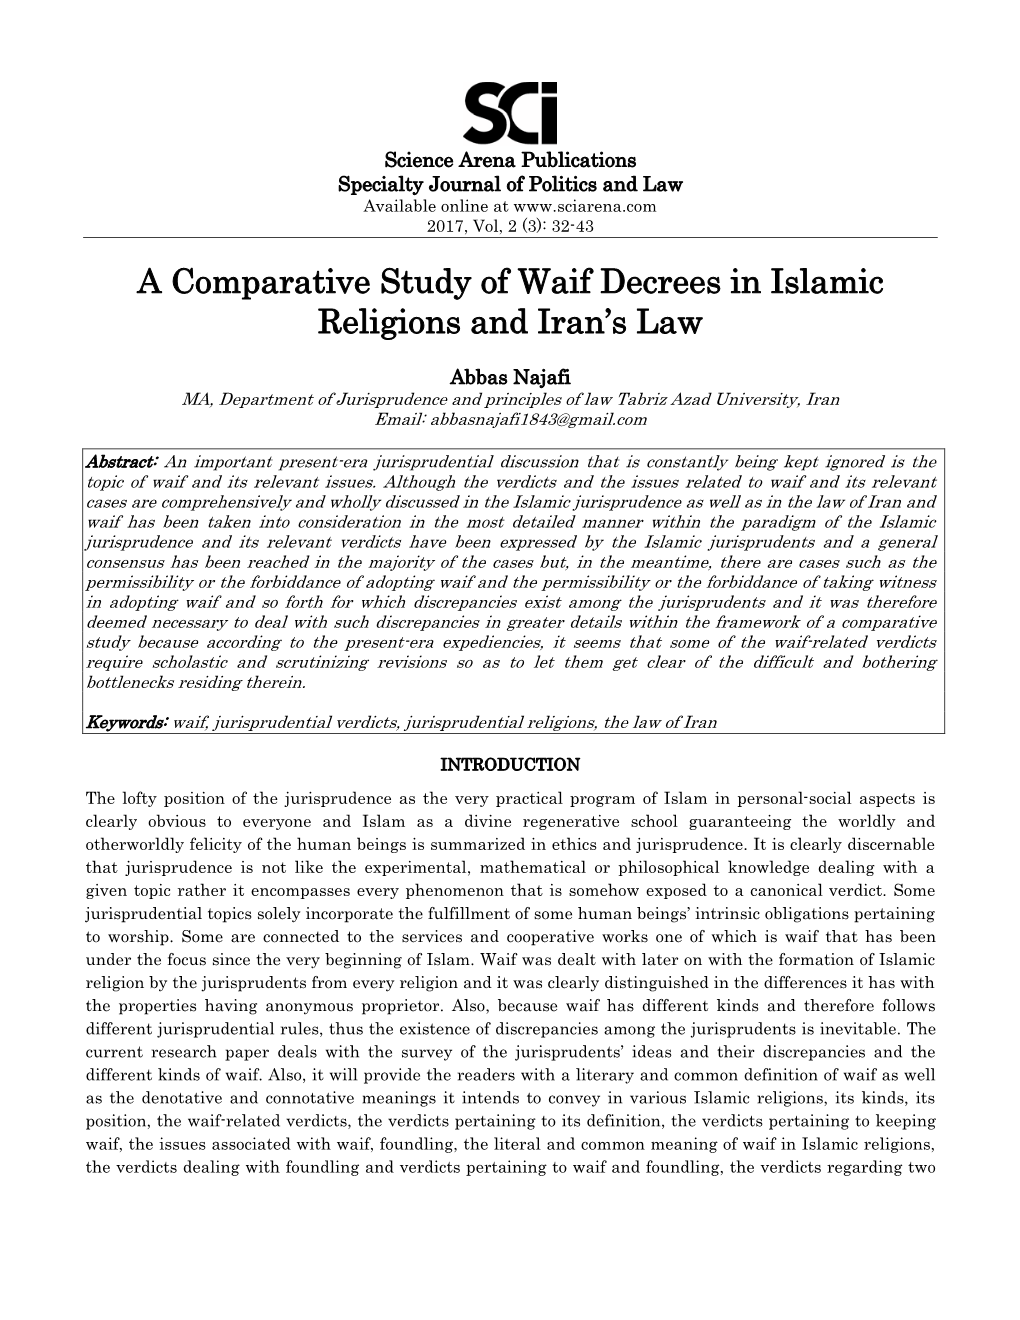 A Comparative Study of Waif Decrees in Islamic Religions and Iran's